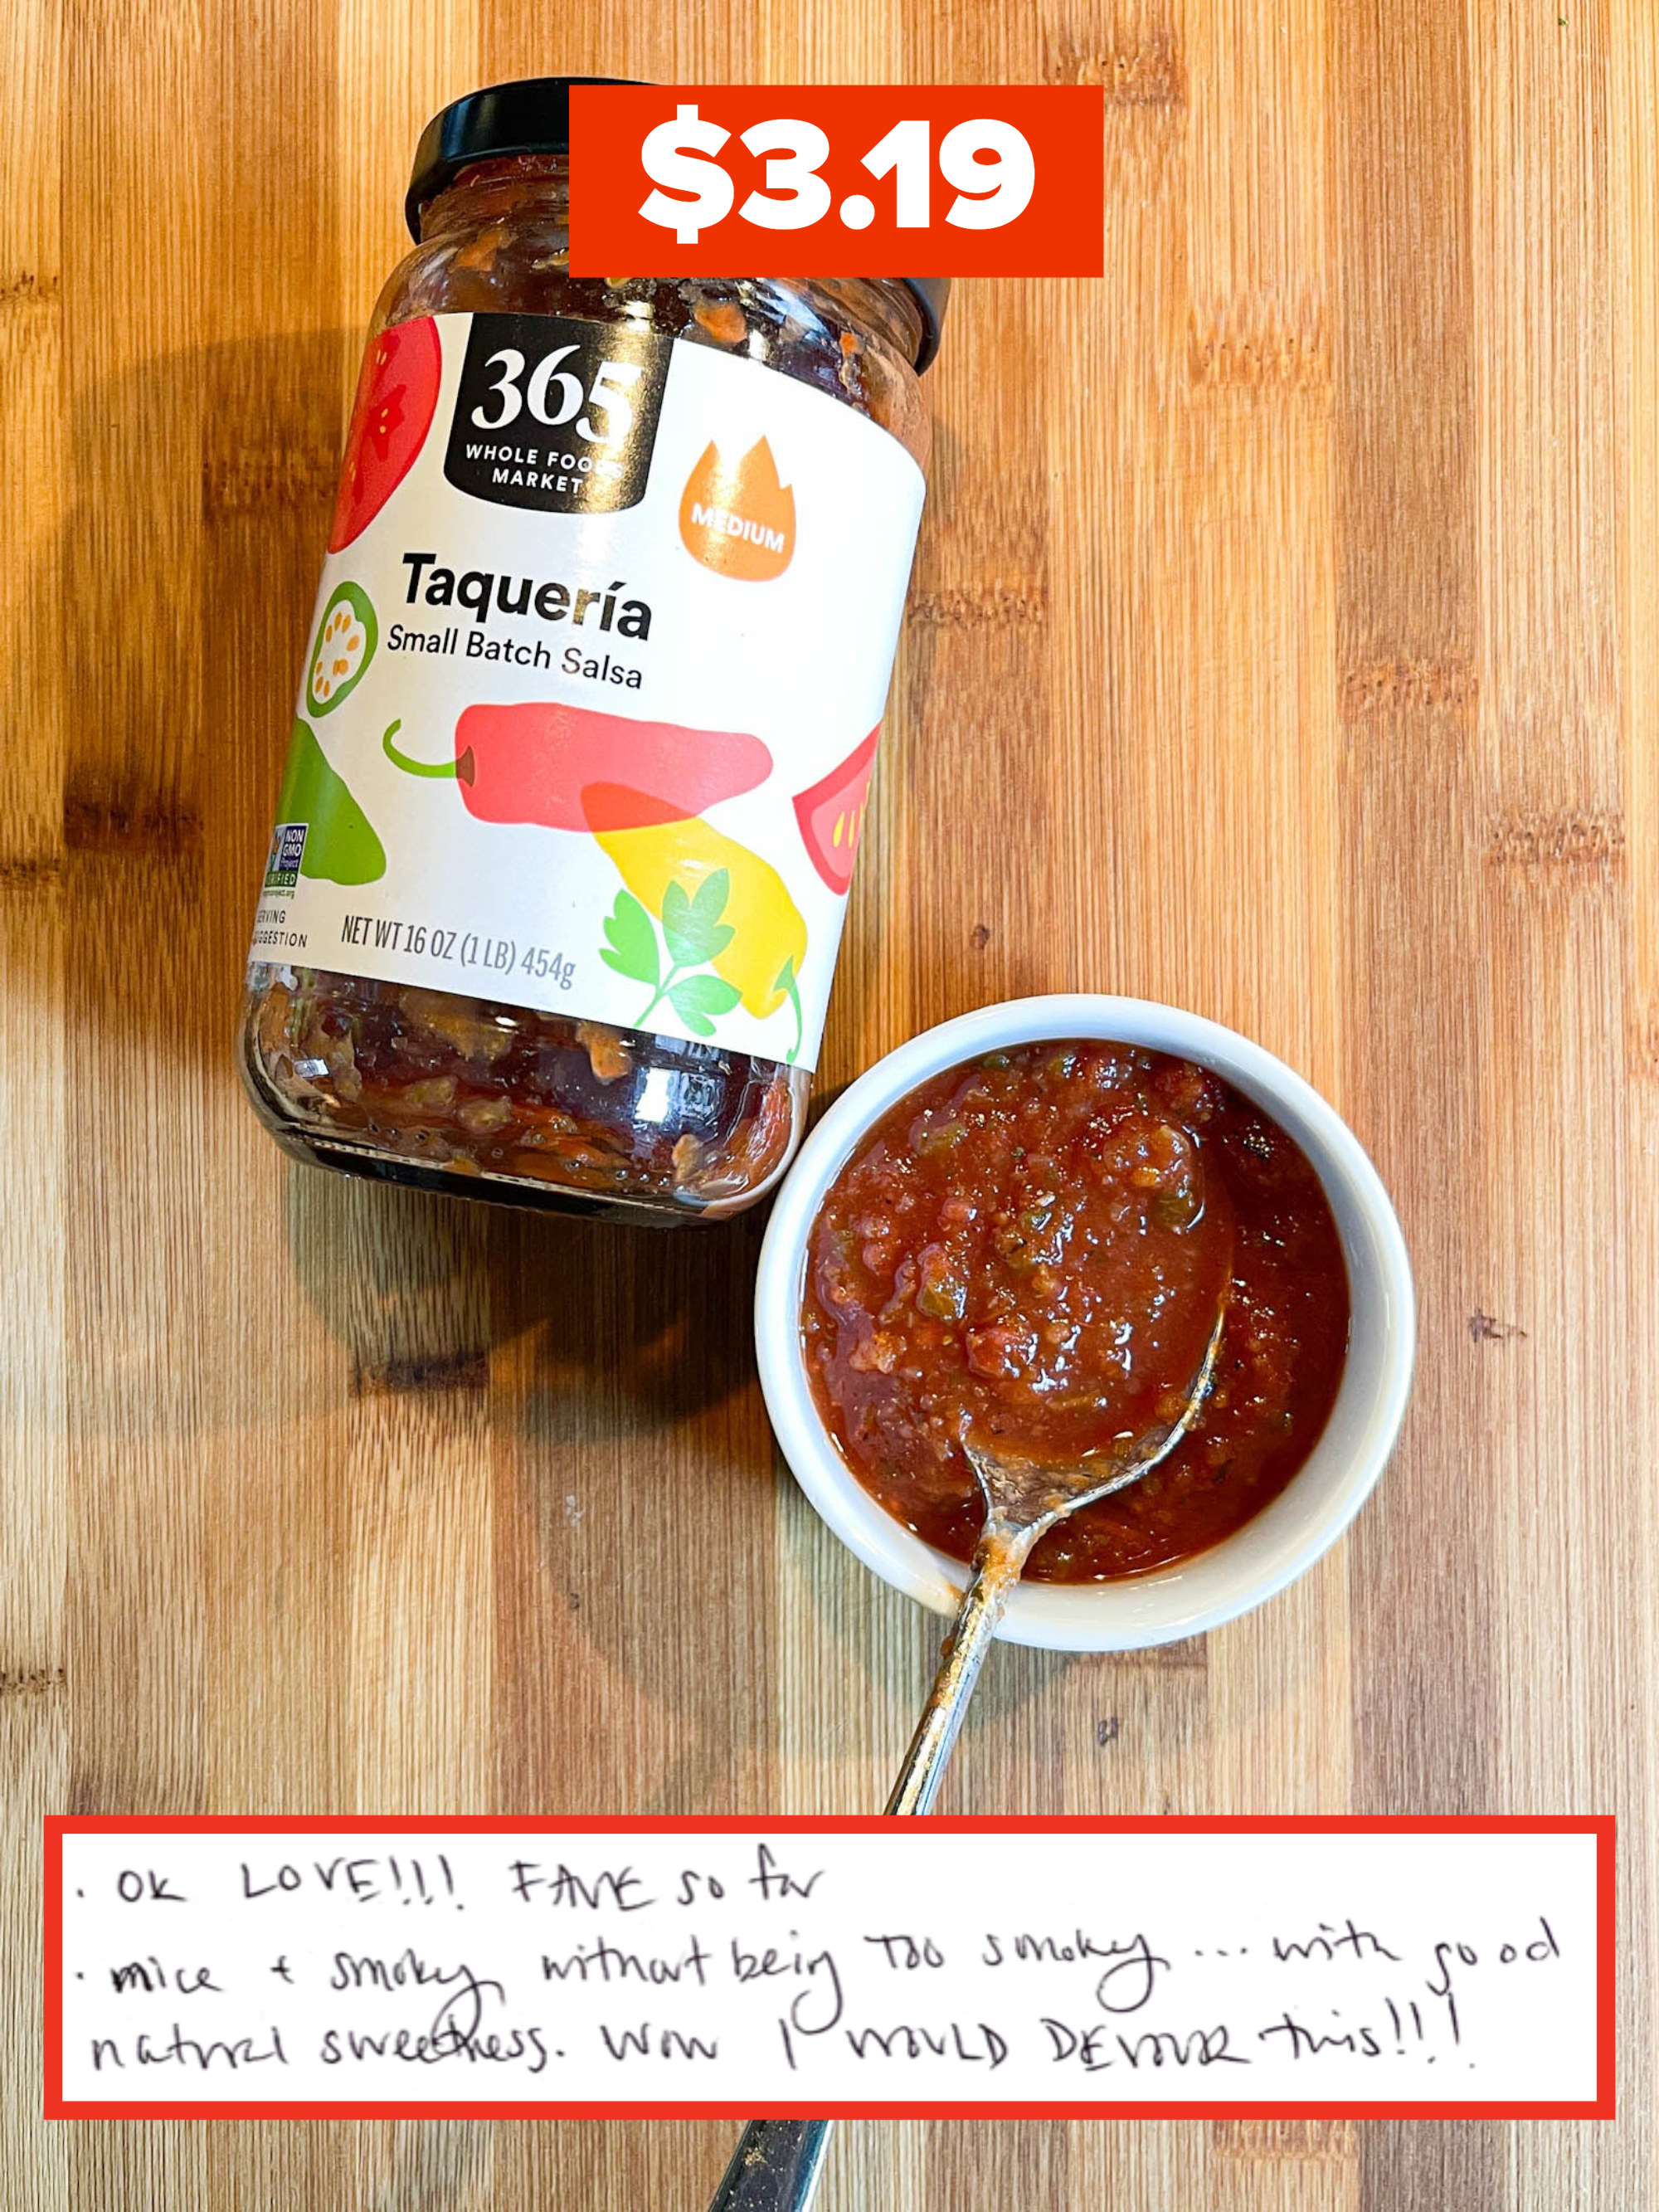 Photo of the salsa next to an excerpt from the writer&#x27;s notes that says &quot;Wow, I would devour this!&quot;